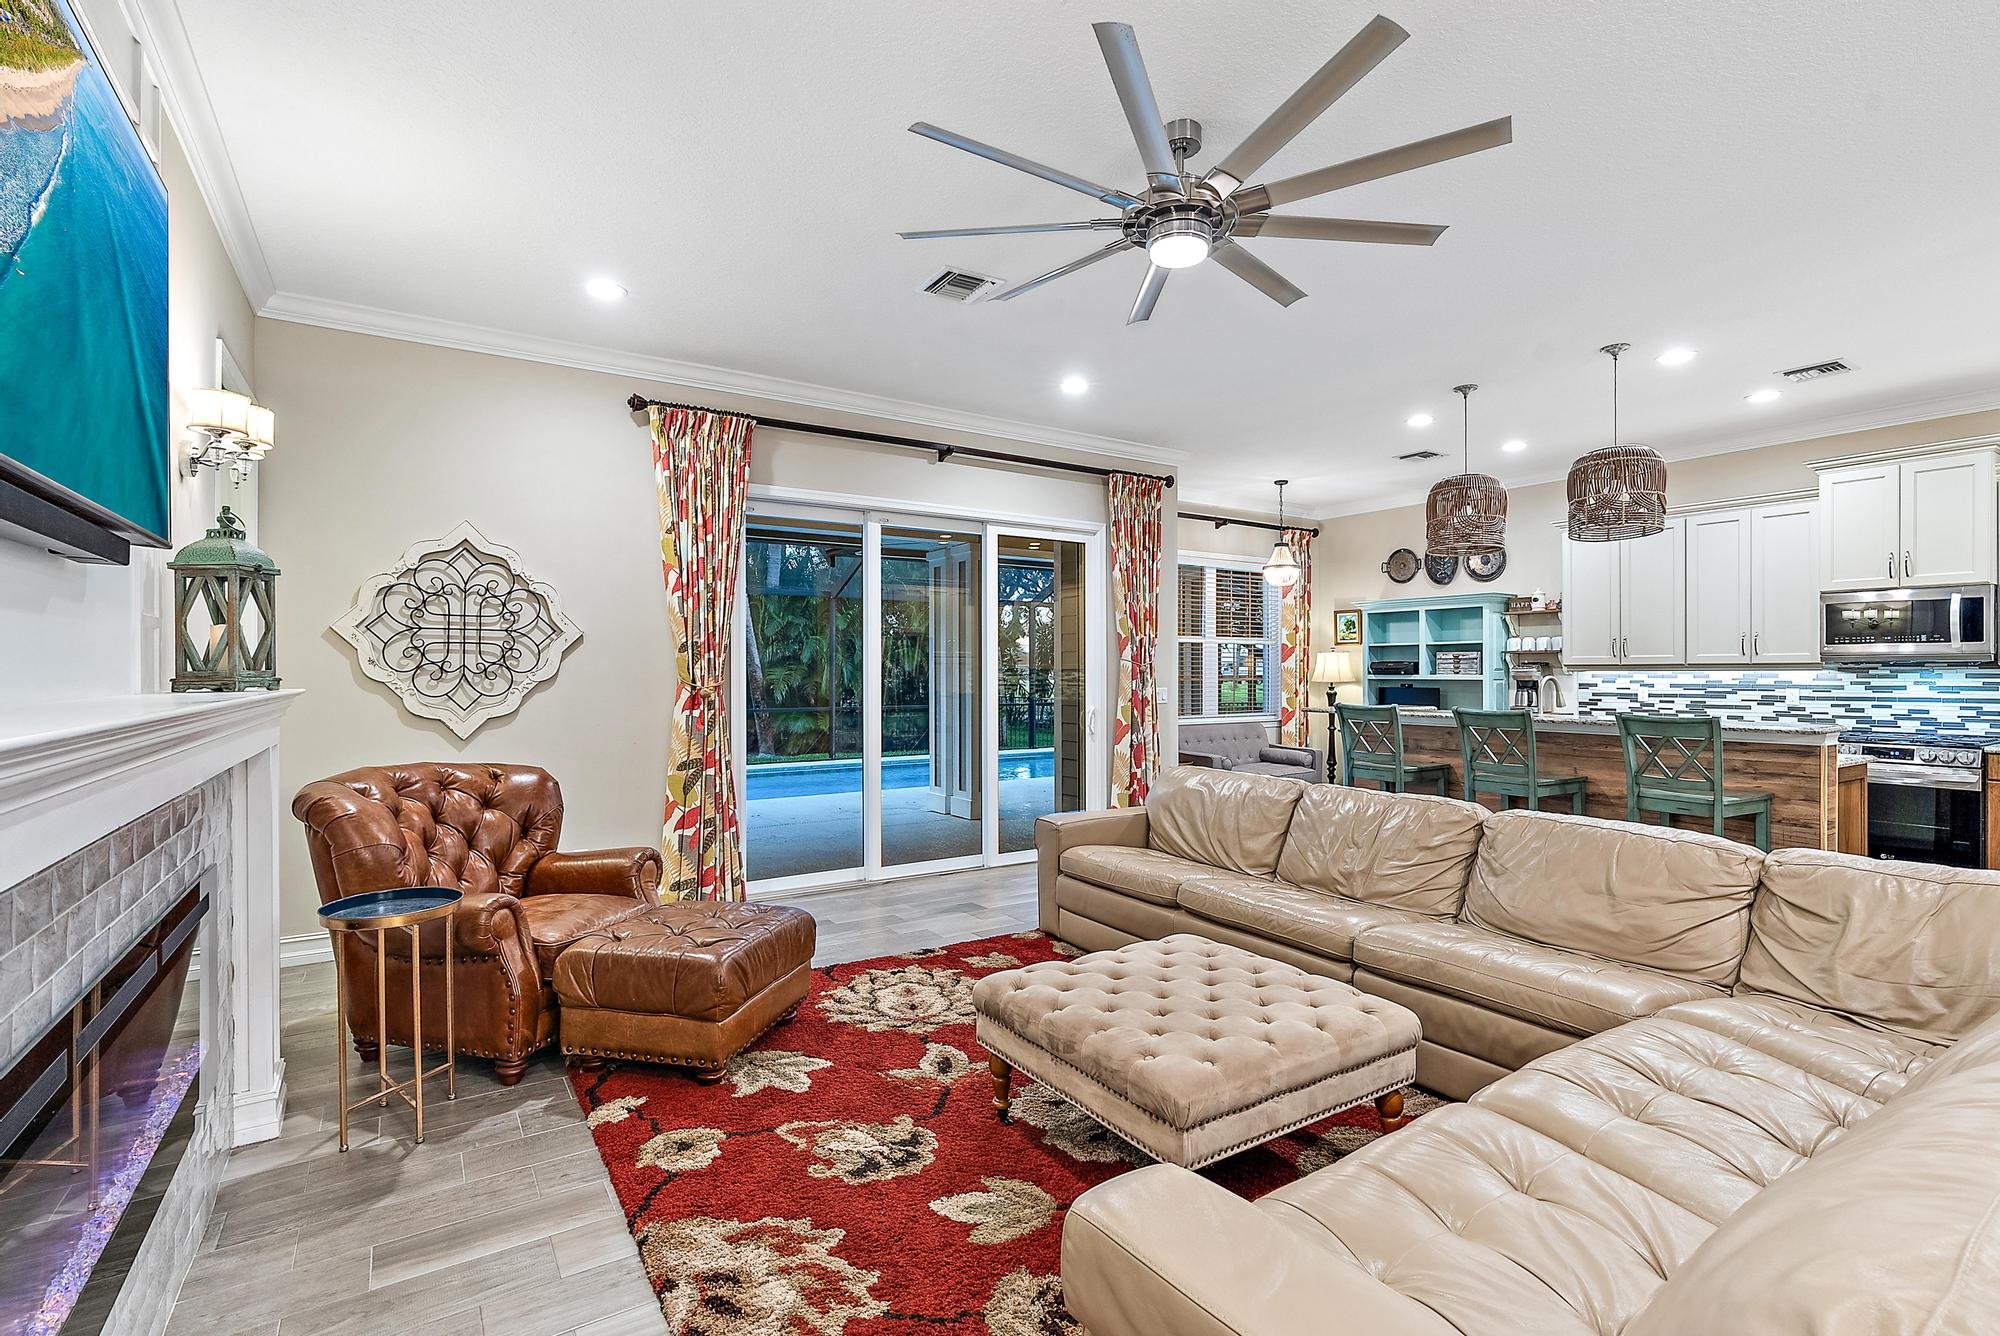 home in lucie county listed for sale by top realtors in south florida